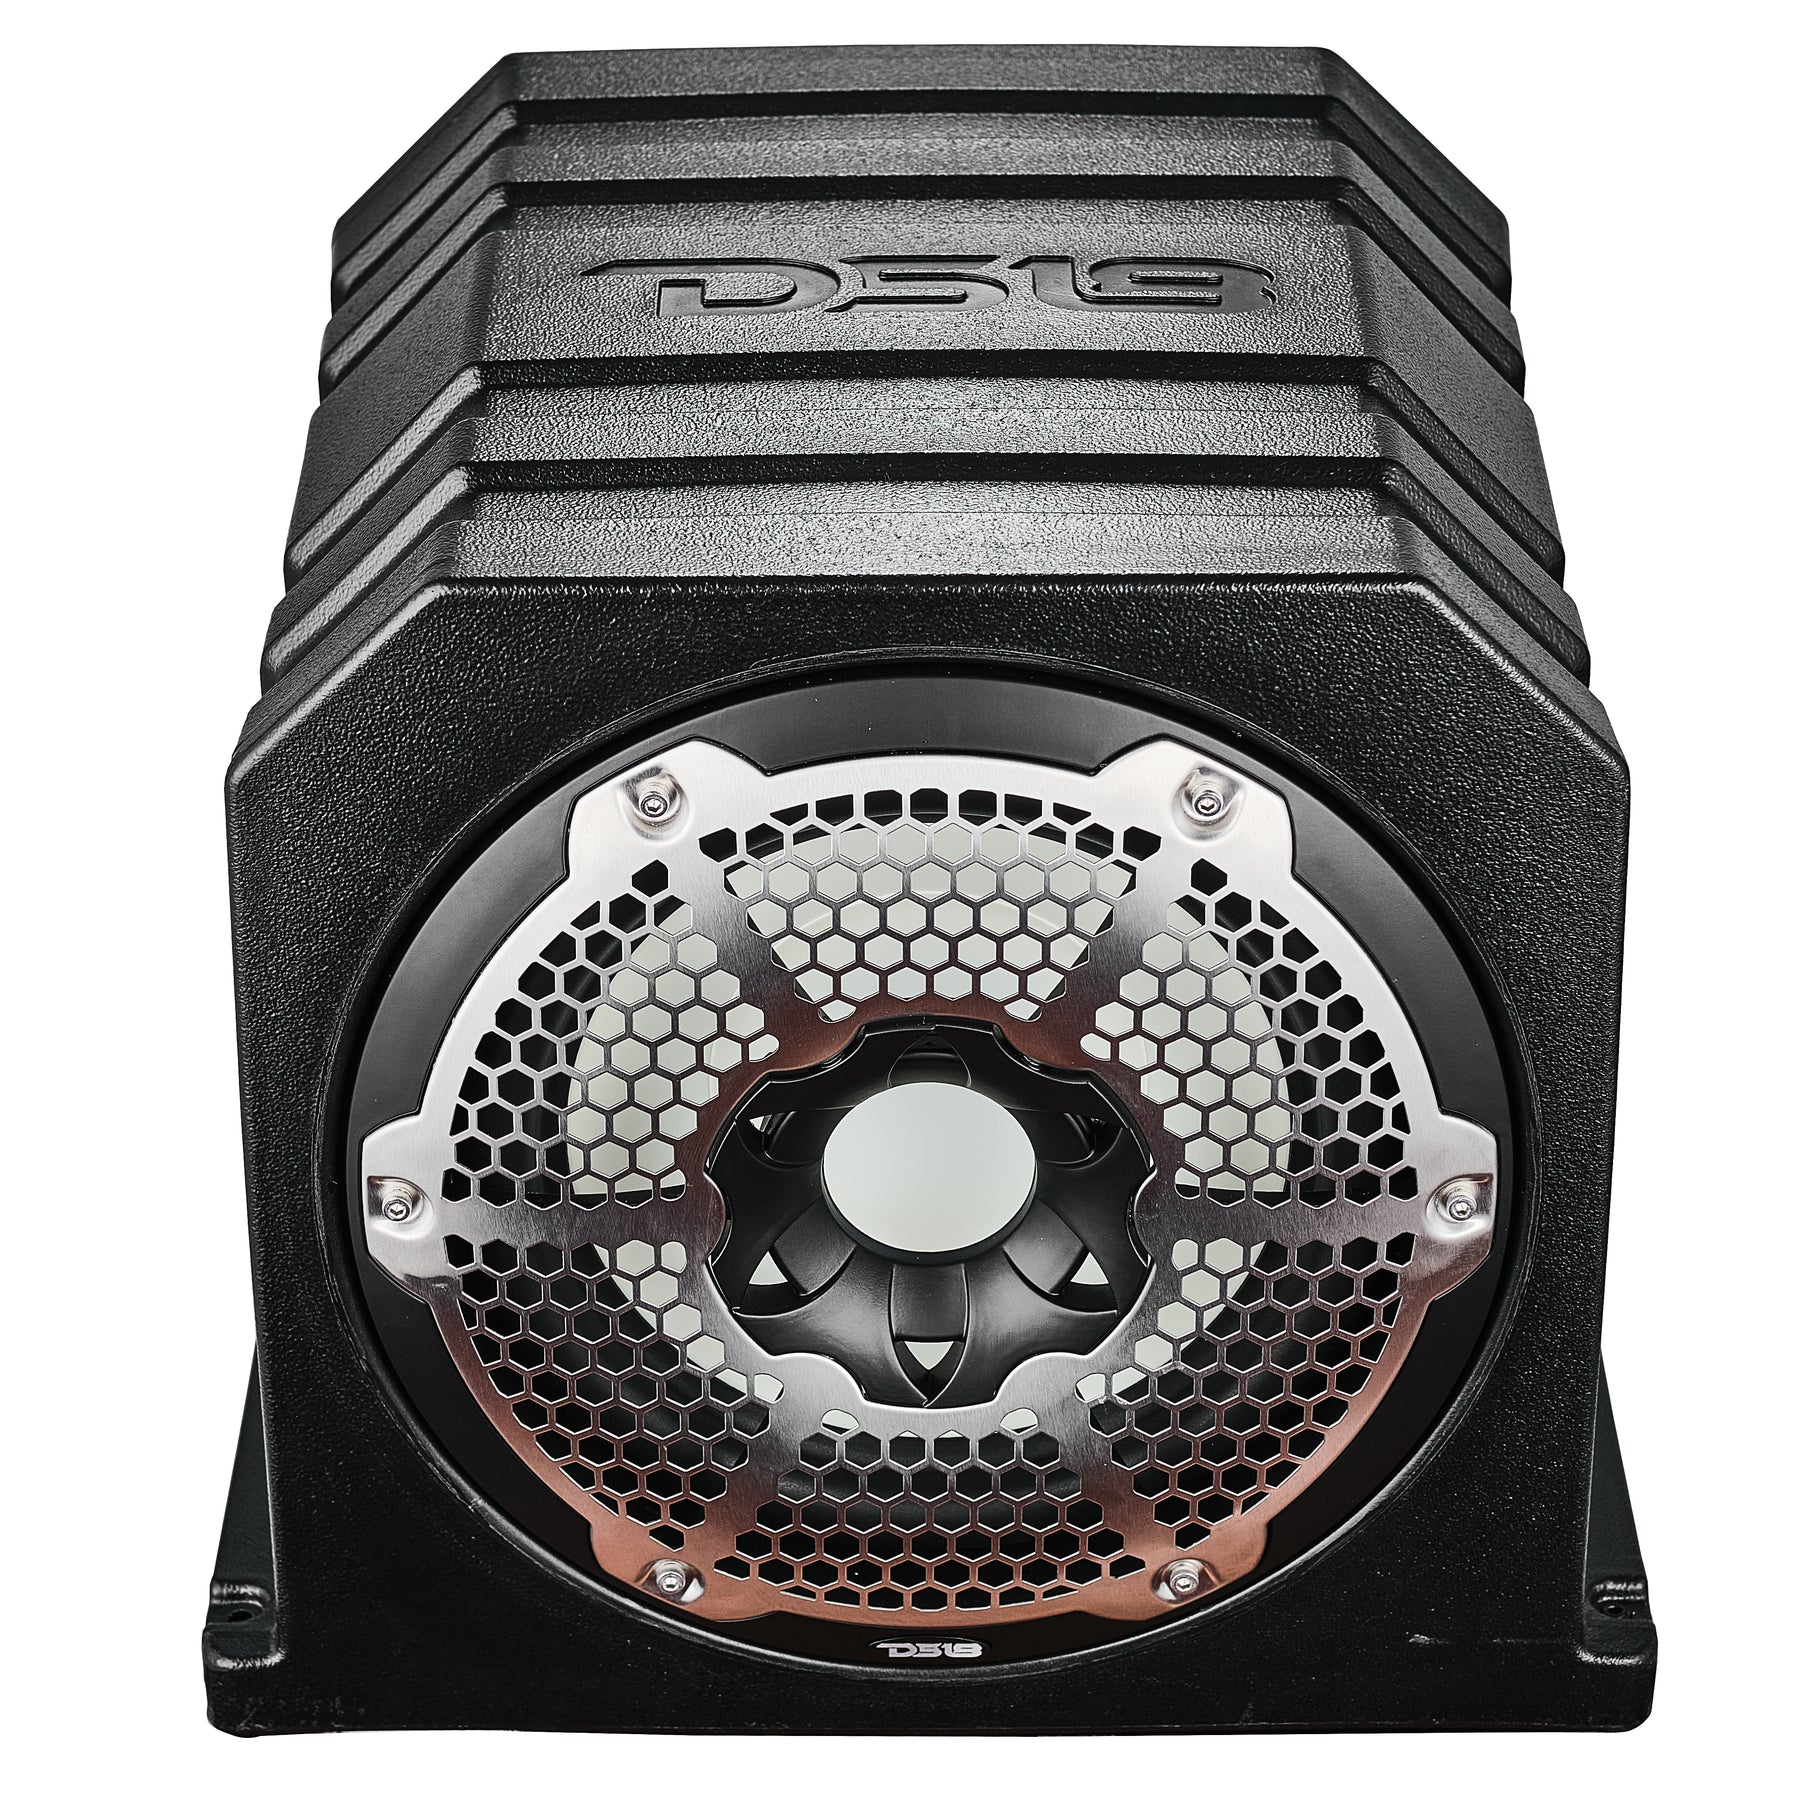 Daul 10" Marine Subwoofer Enclosure with 10" Passive Radiator and LED RGB Lights 350 Watts Rms 4-Ohm (NXL-10SUB Included)